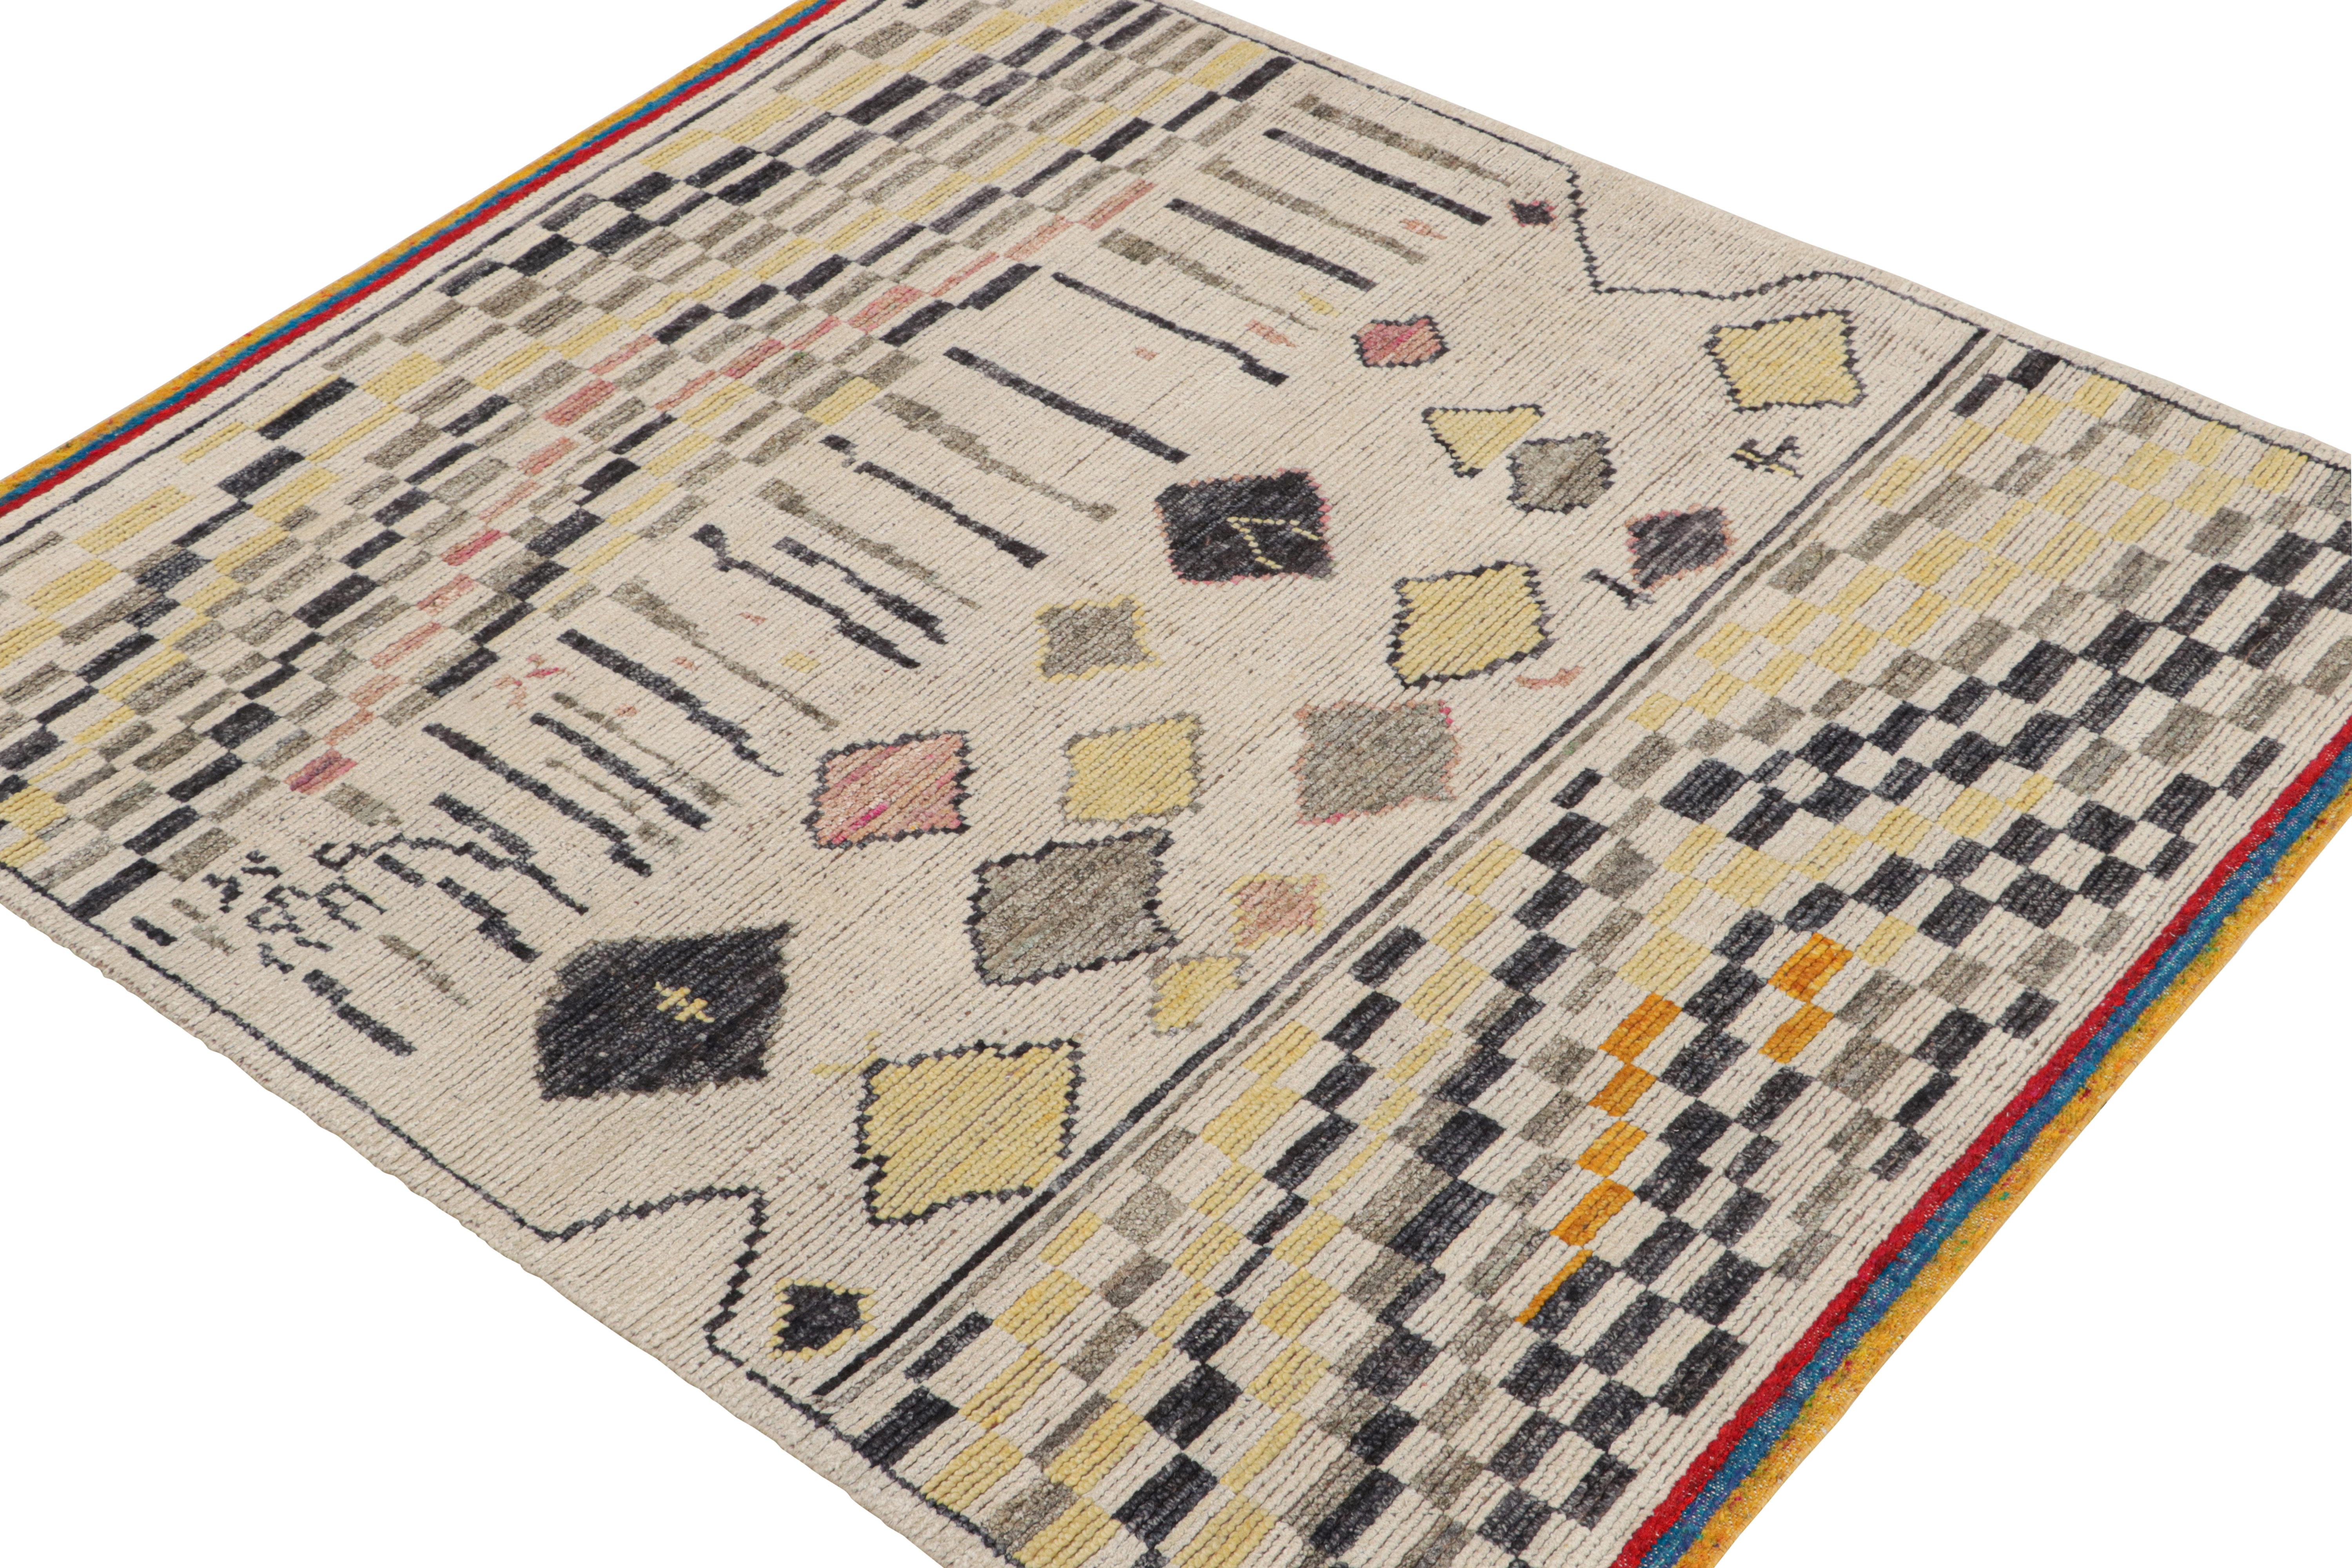 This contemporary 6x7 rug is the newest entry to Rug & Kilim's new Moroccan Collection—a bold take on the iconic style. Hand-knotted in a blend of wool, silk, and cotton.
Further on the Design:
The design takes inspiration from playful archaic